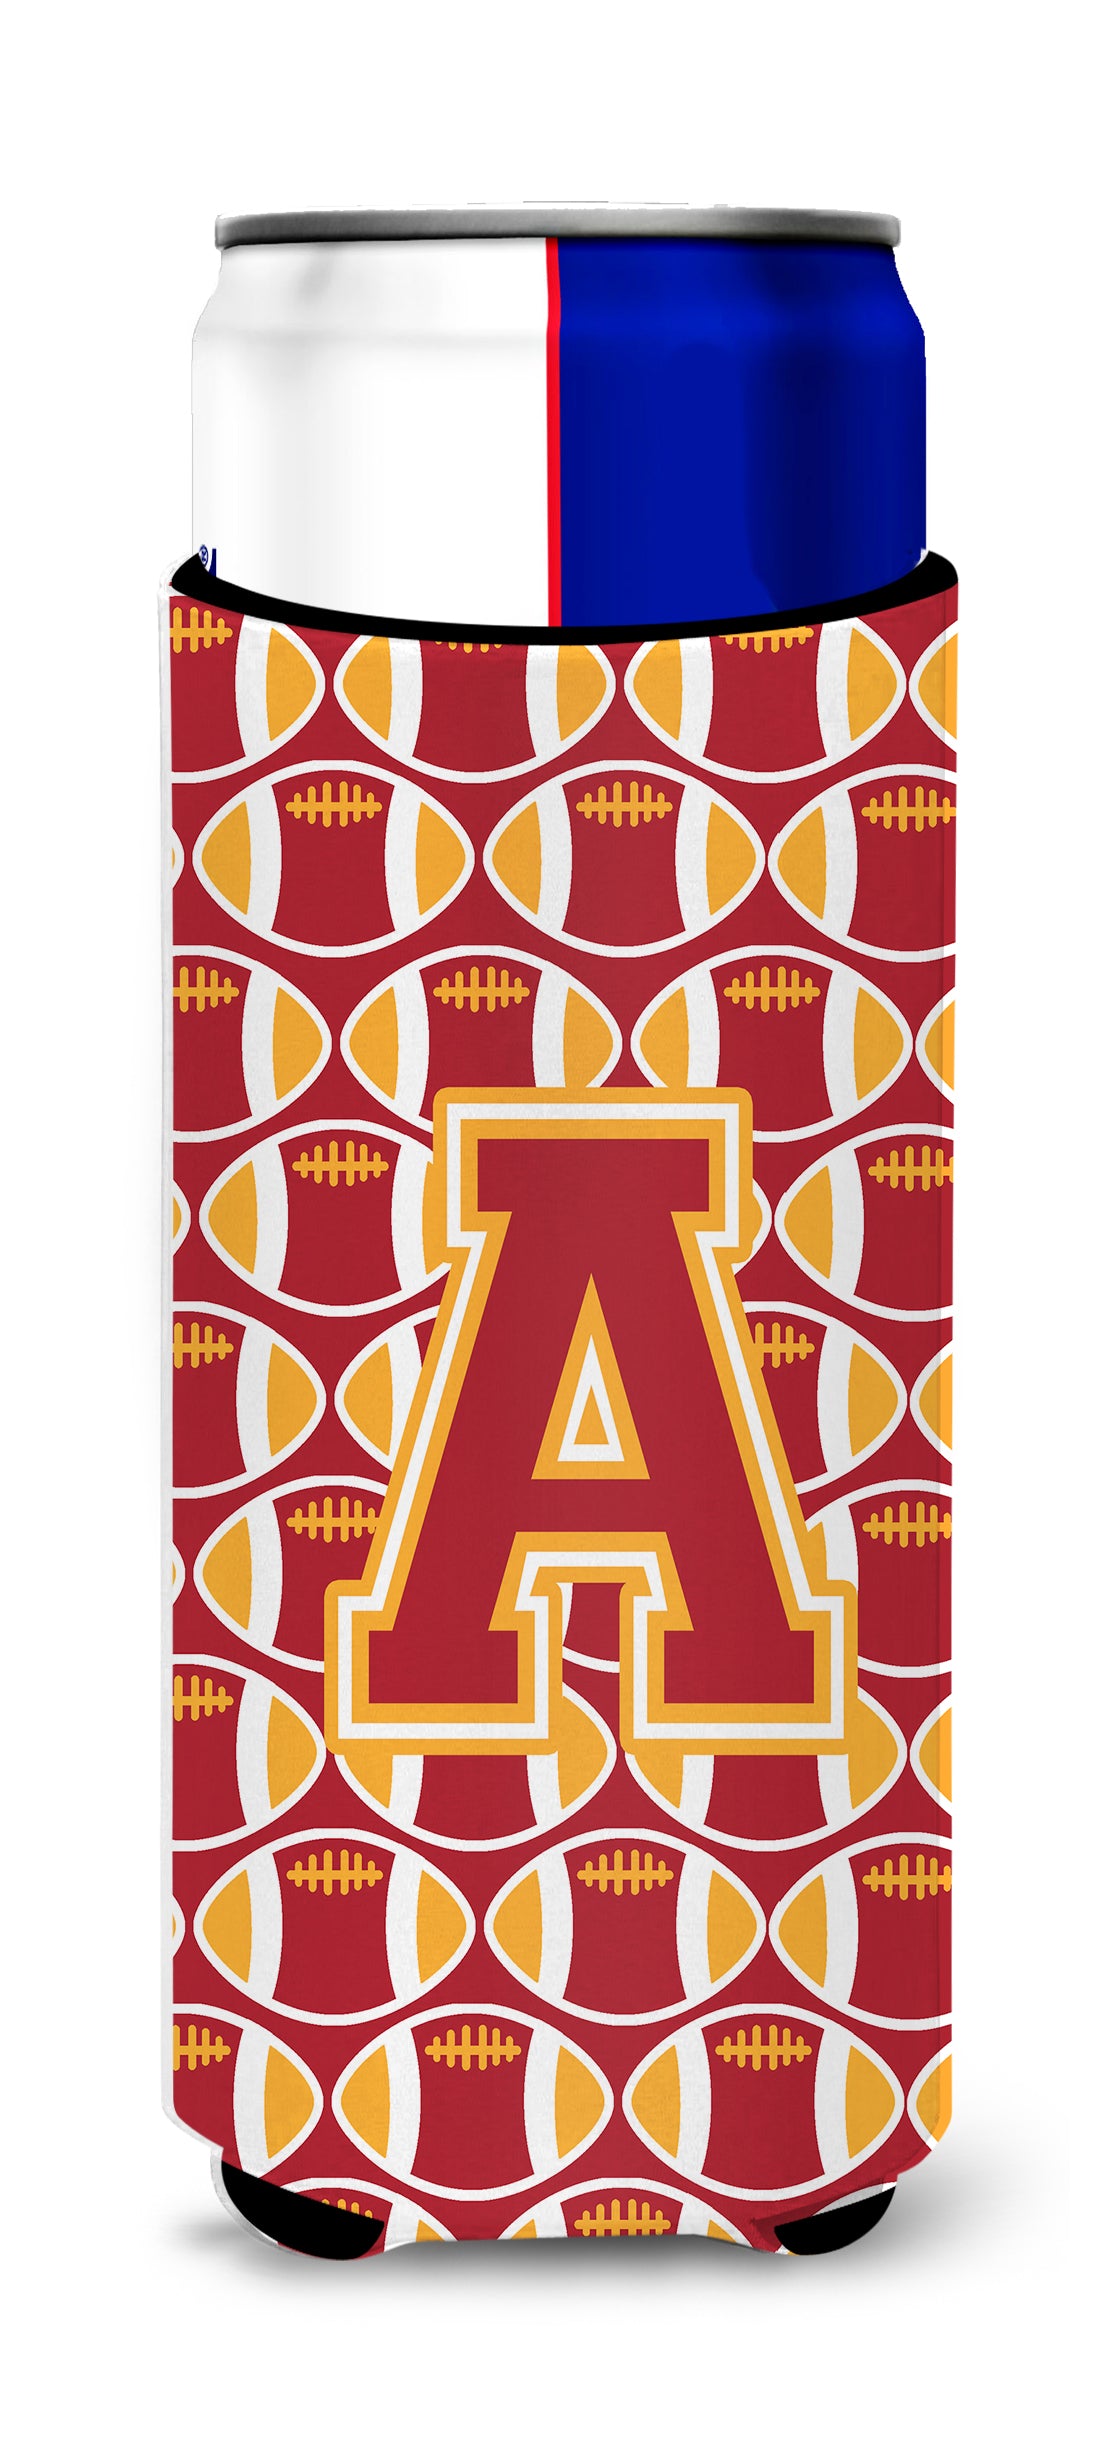 Letter A Football Cardinal and Gold Ultra Beverage Insulators for slim cans CJ1070-AMUK.